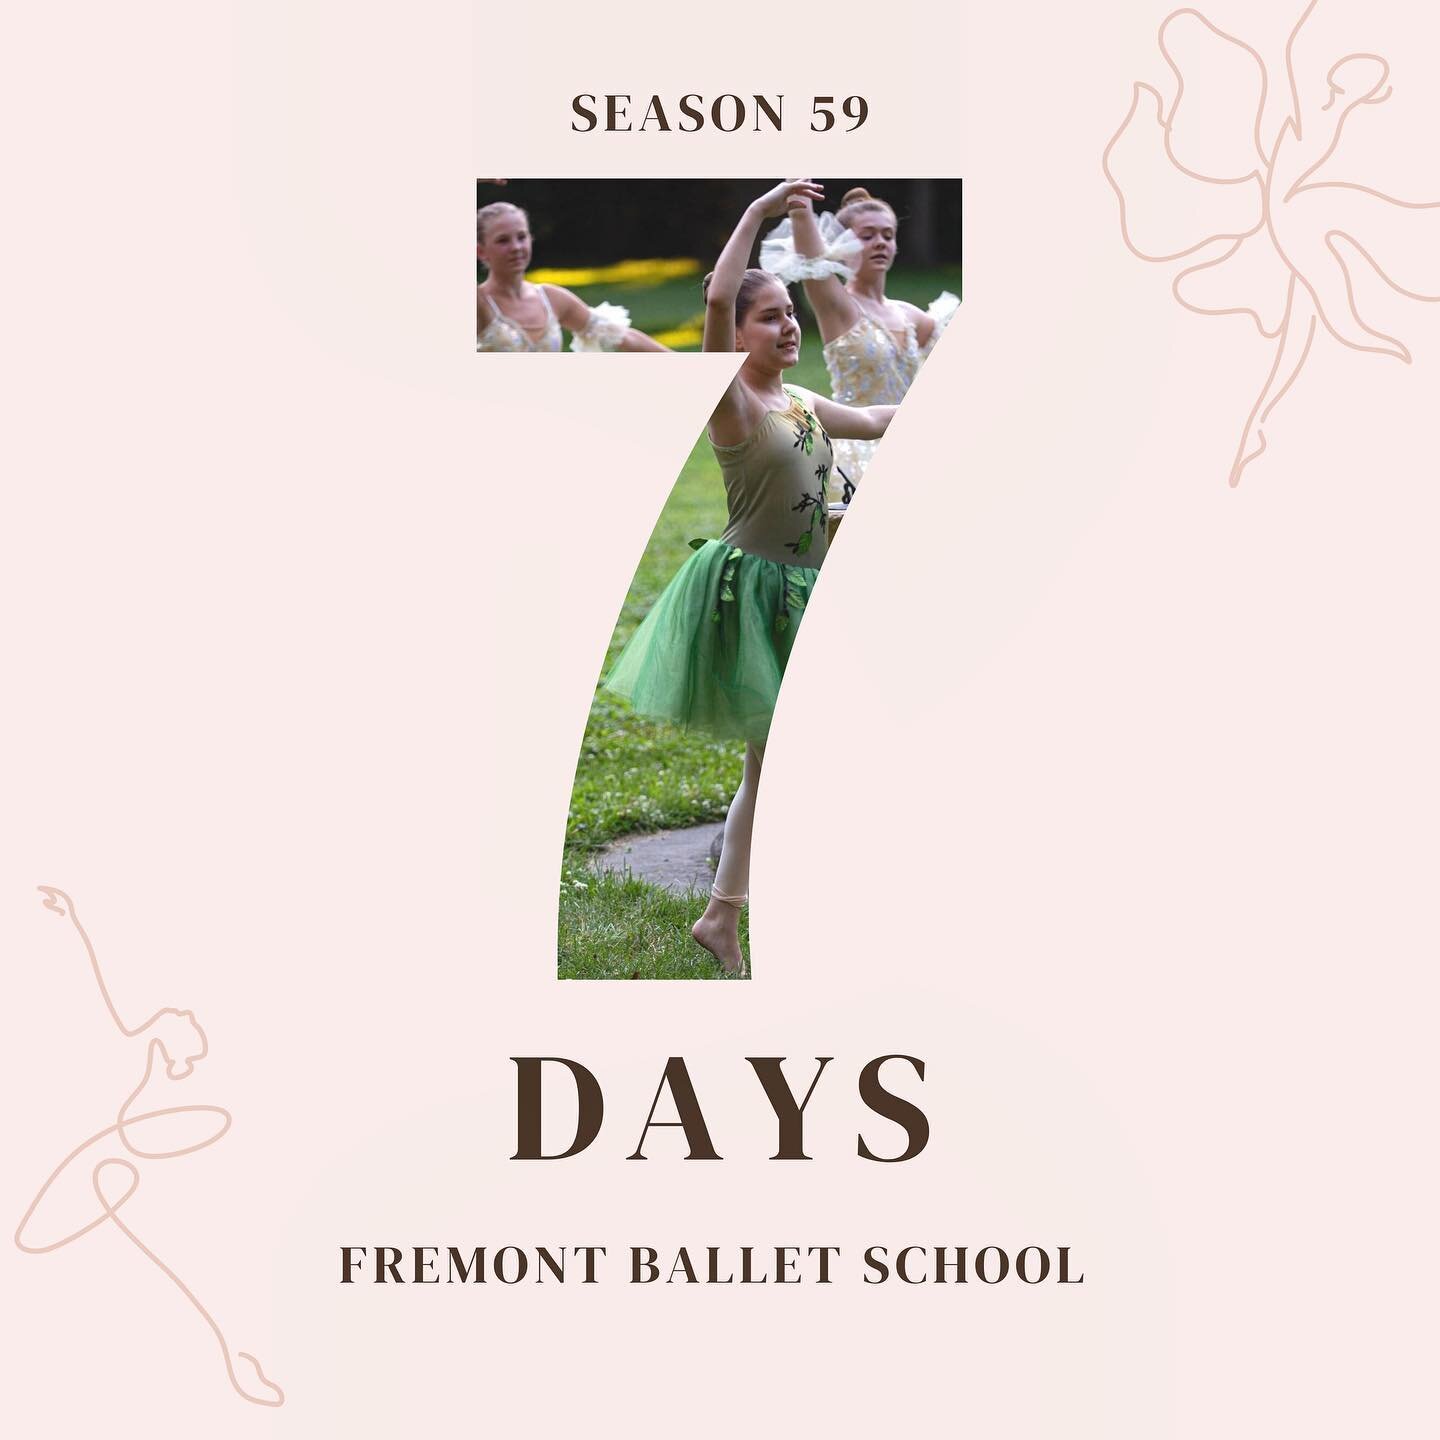 ✨ One week, 7️⃣ days until season 59! Are you ready? Do you have shoes, leotards, and tights that fit? Do you know how to put your hair in a bun? Today is a great day to practice! 🤩 

#FremontBalleySchool #ballet #FremontOhio #FremontOhioDance